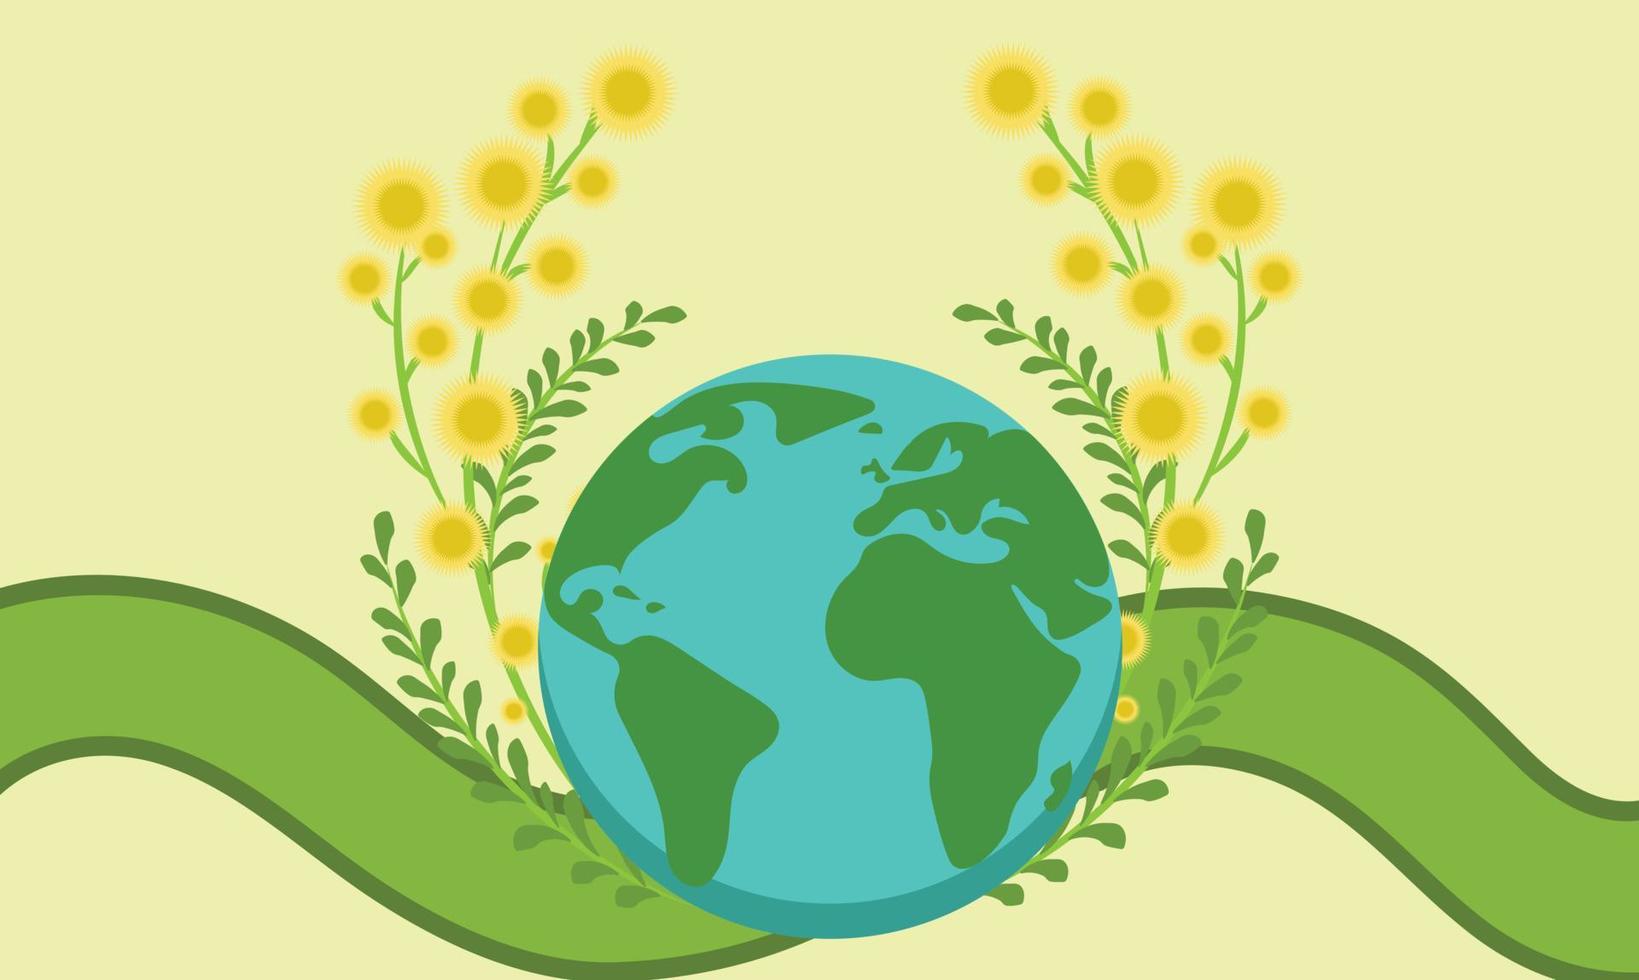 A green earth with yellow flowers and a green globe on it. vector